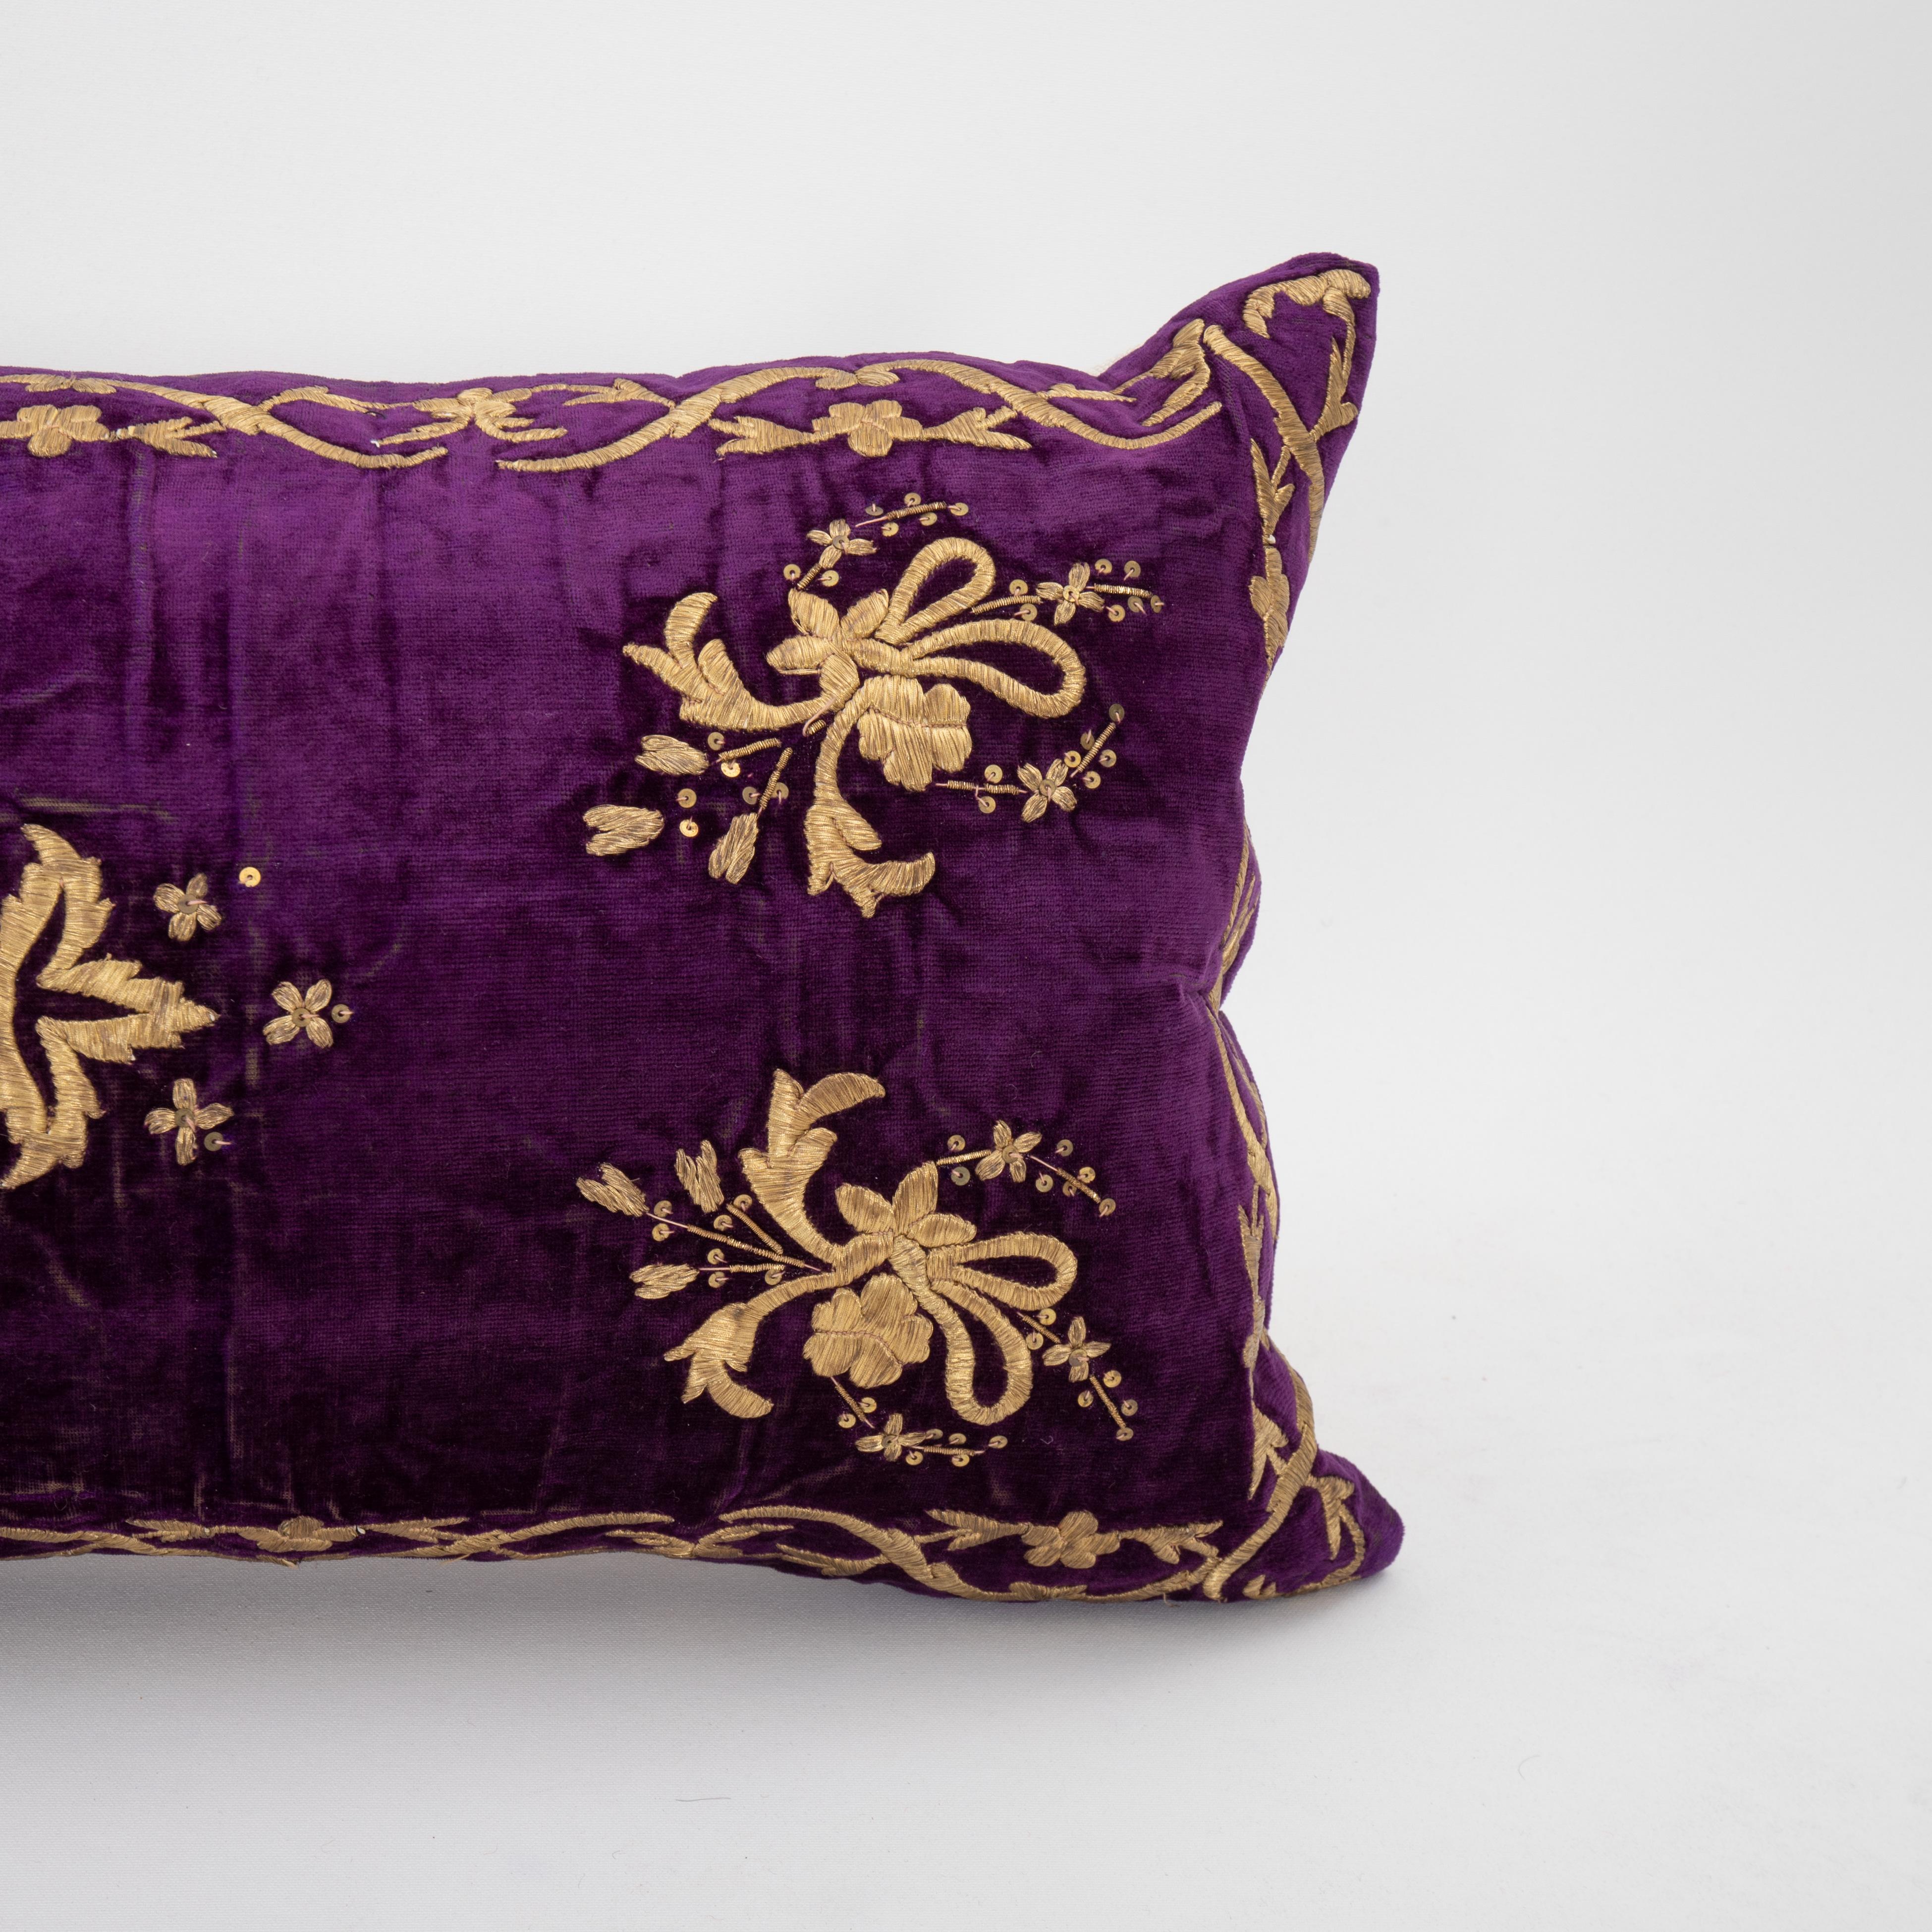 19th Century Ottoman / Turkish Pillow Cover in Sarma Technique, late 19th / Early 20th C. For Sale